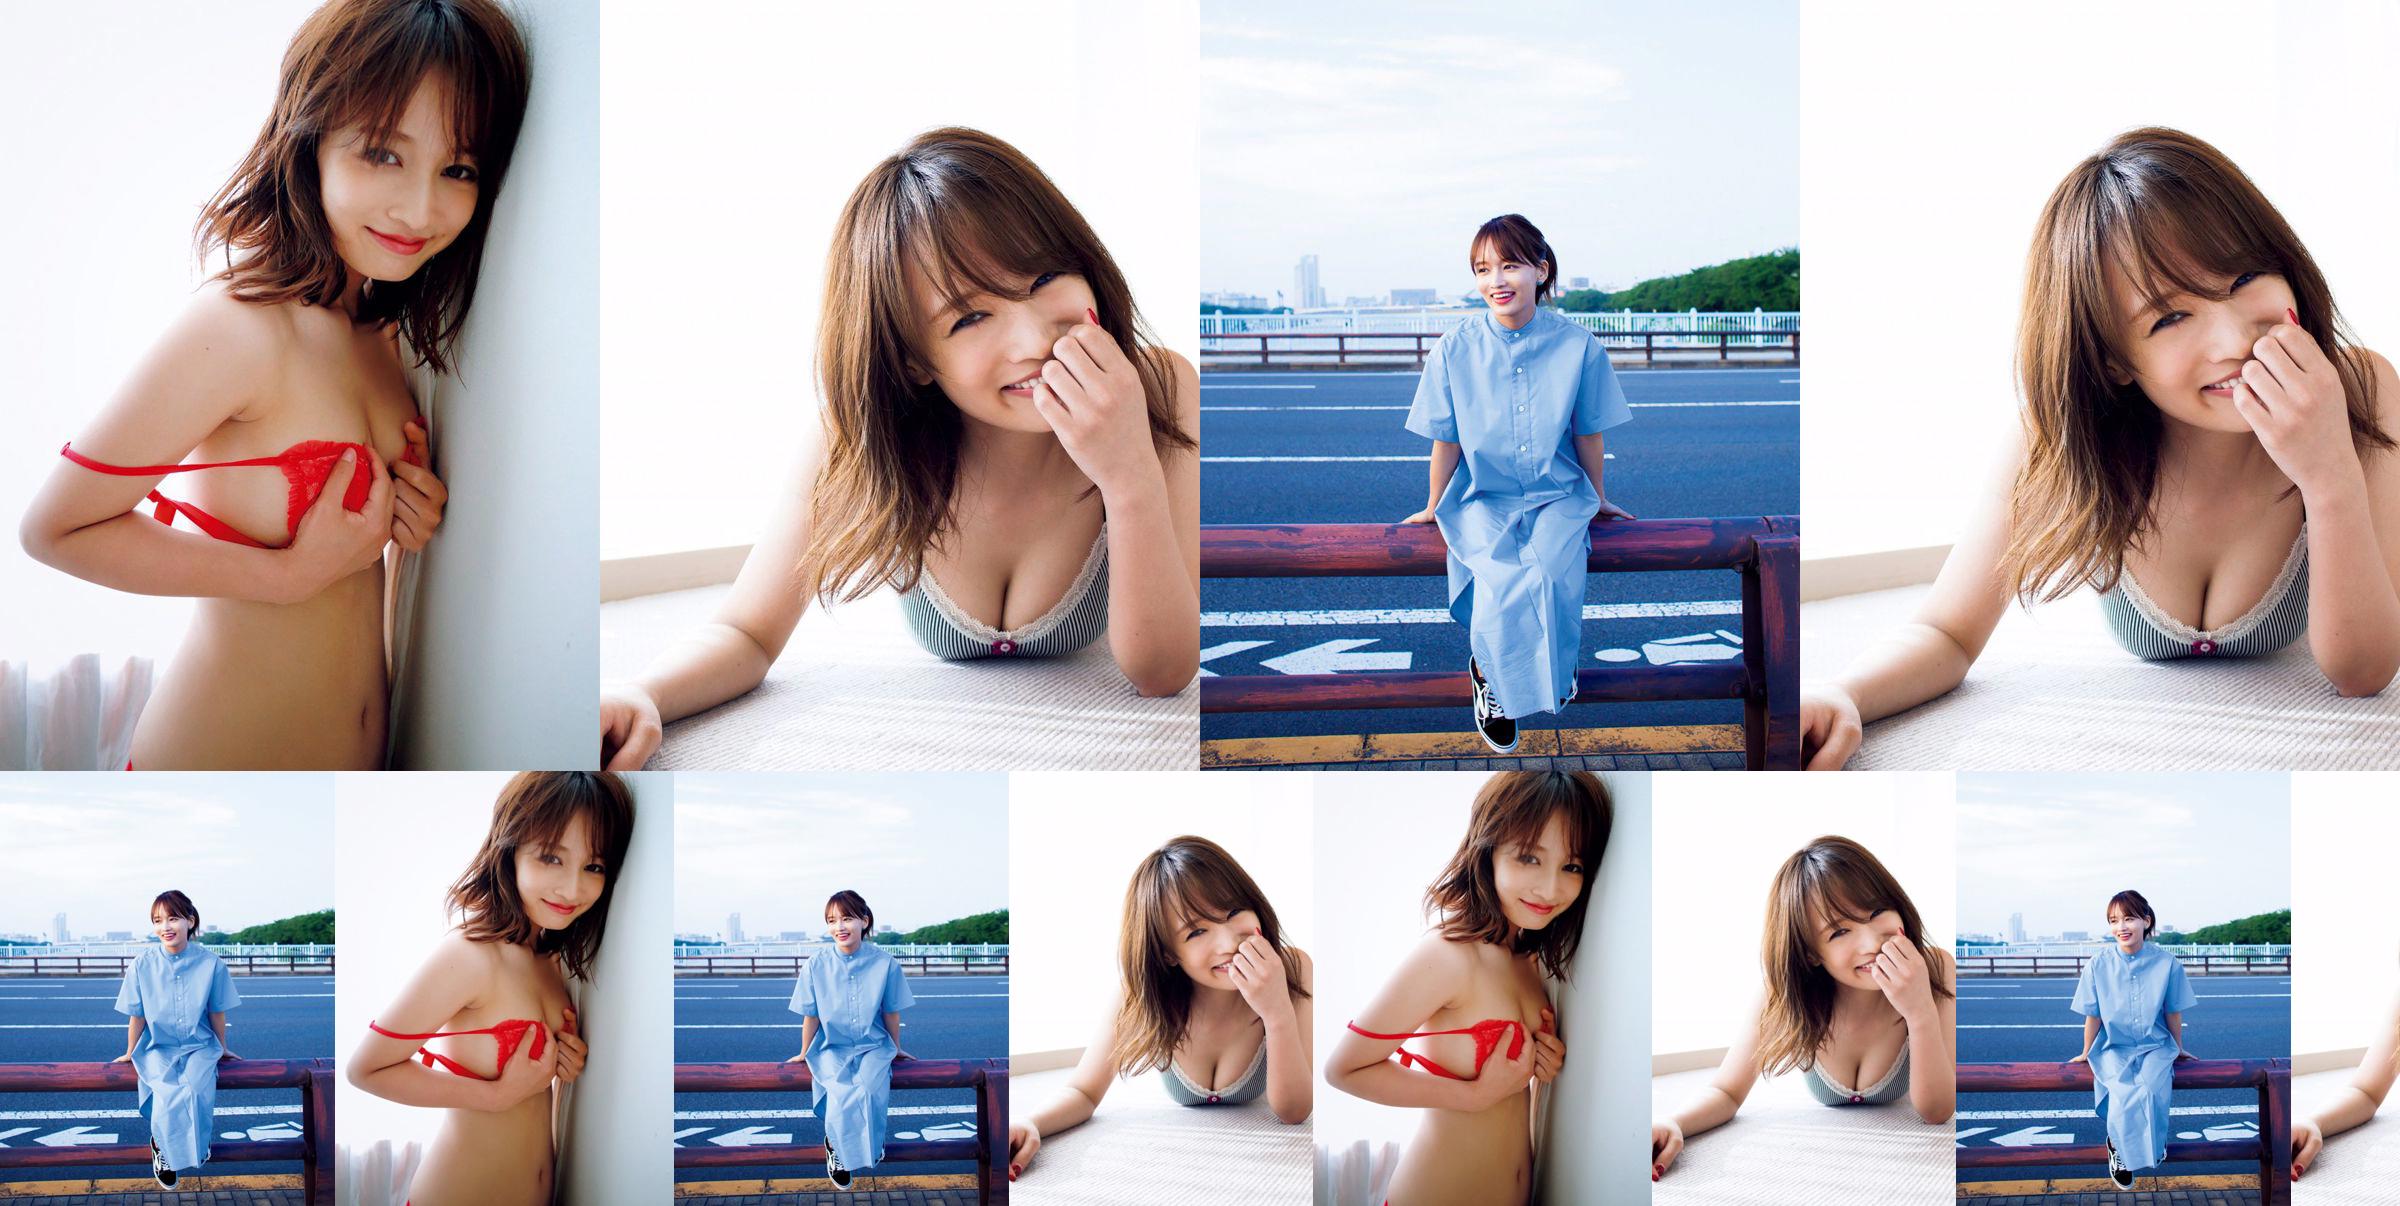 [FRIDAY] Mai Watanabe "F cup with a thin body" photo No.bcc2cd Page 2